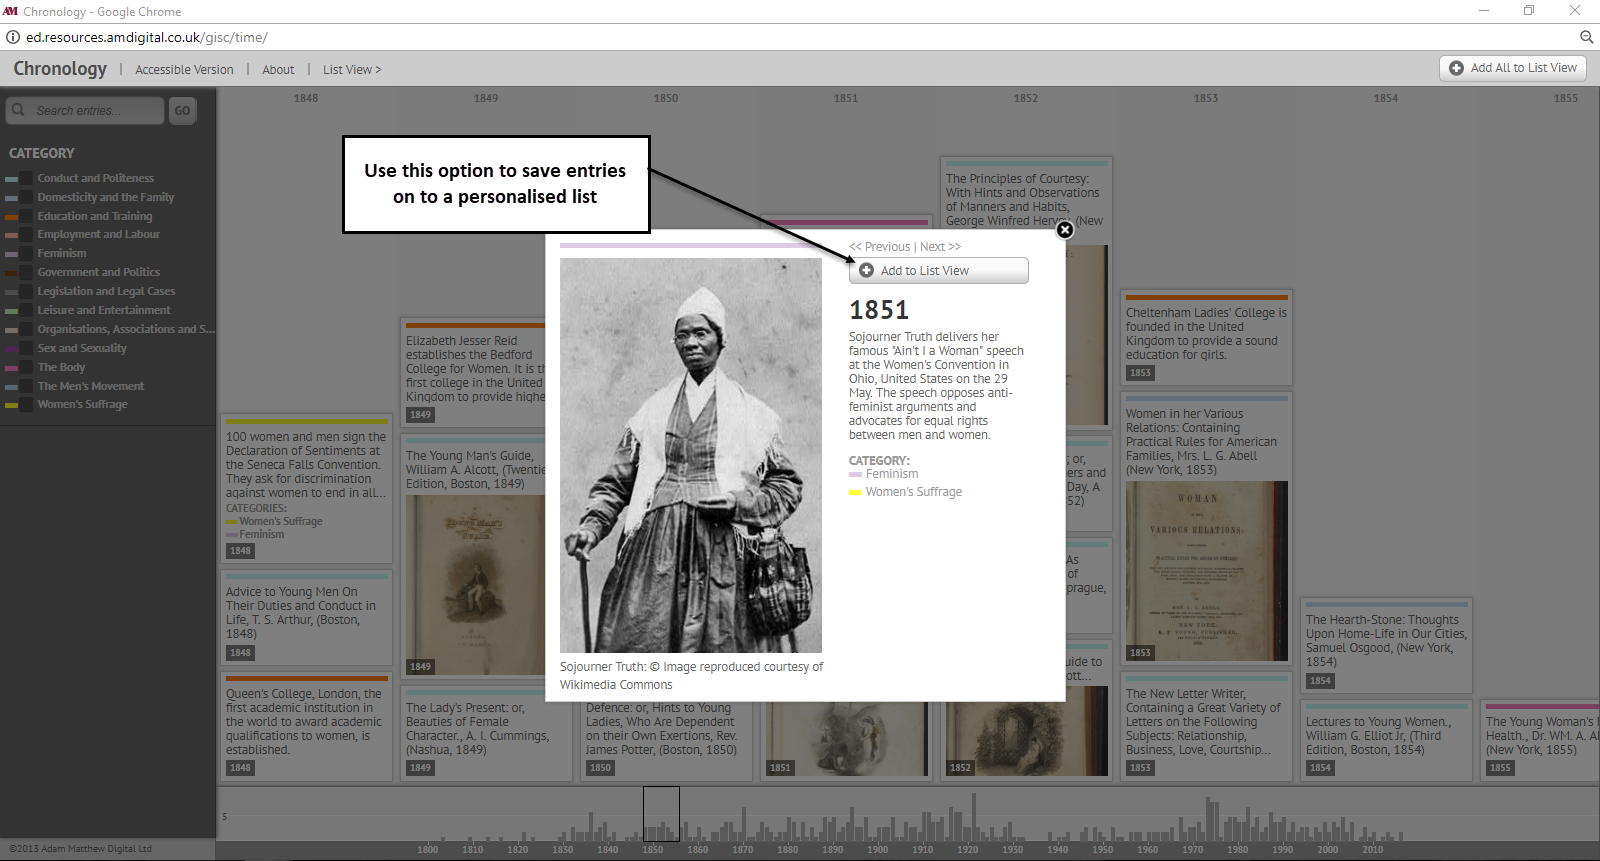 View of option to save entries on to a personalised list in the interactive chronology